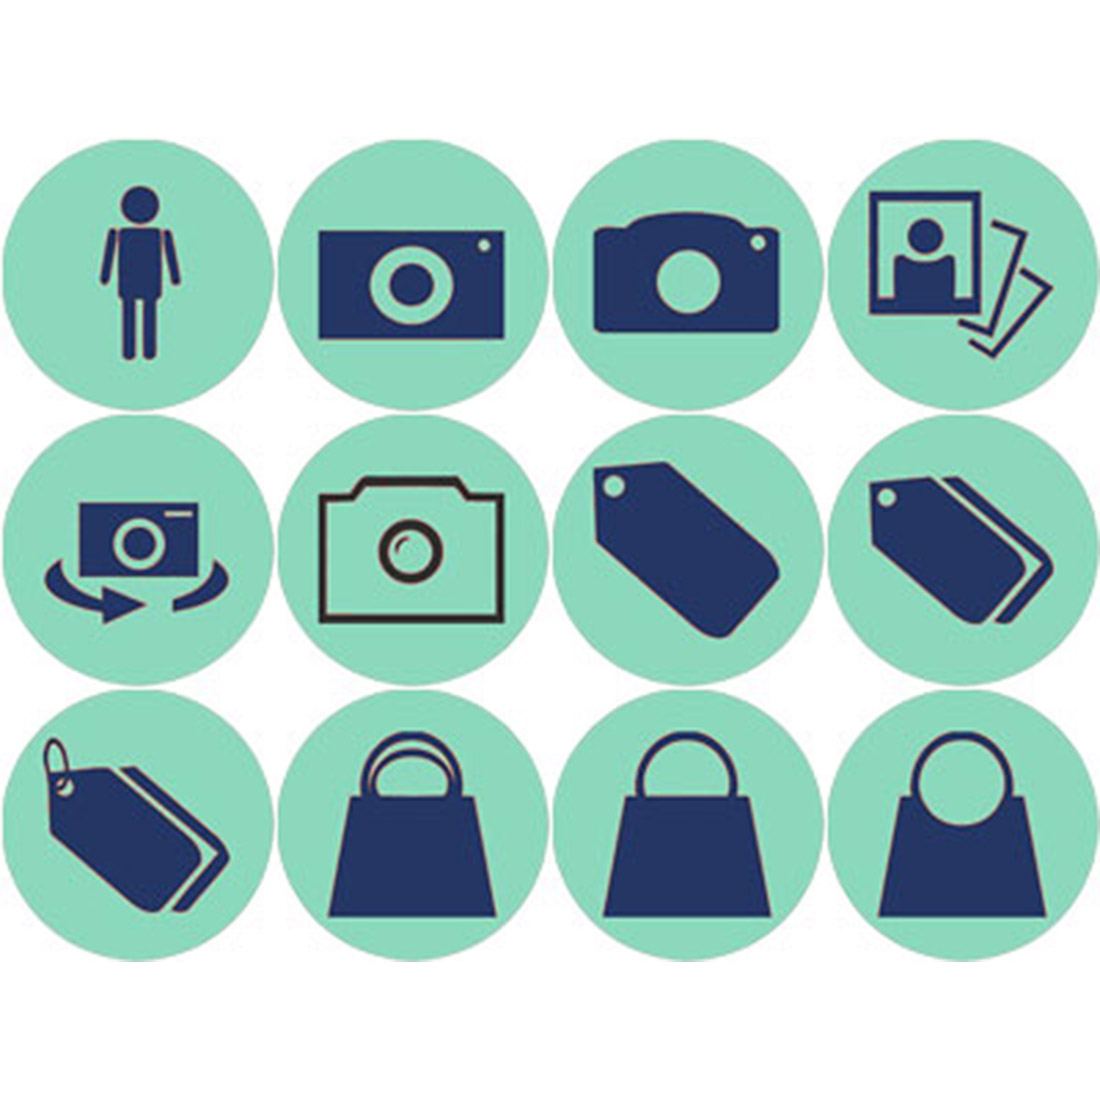 BROWN AND MUSTARD YELLOW SHOPPING ICONS cover image.